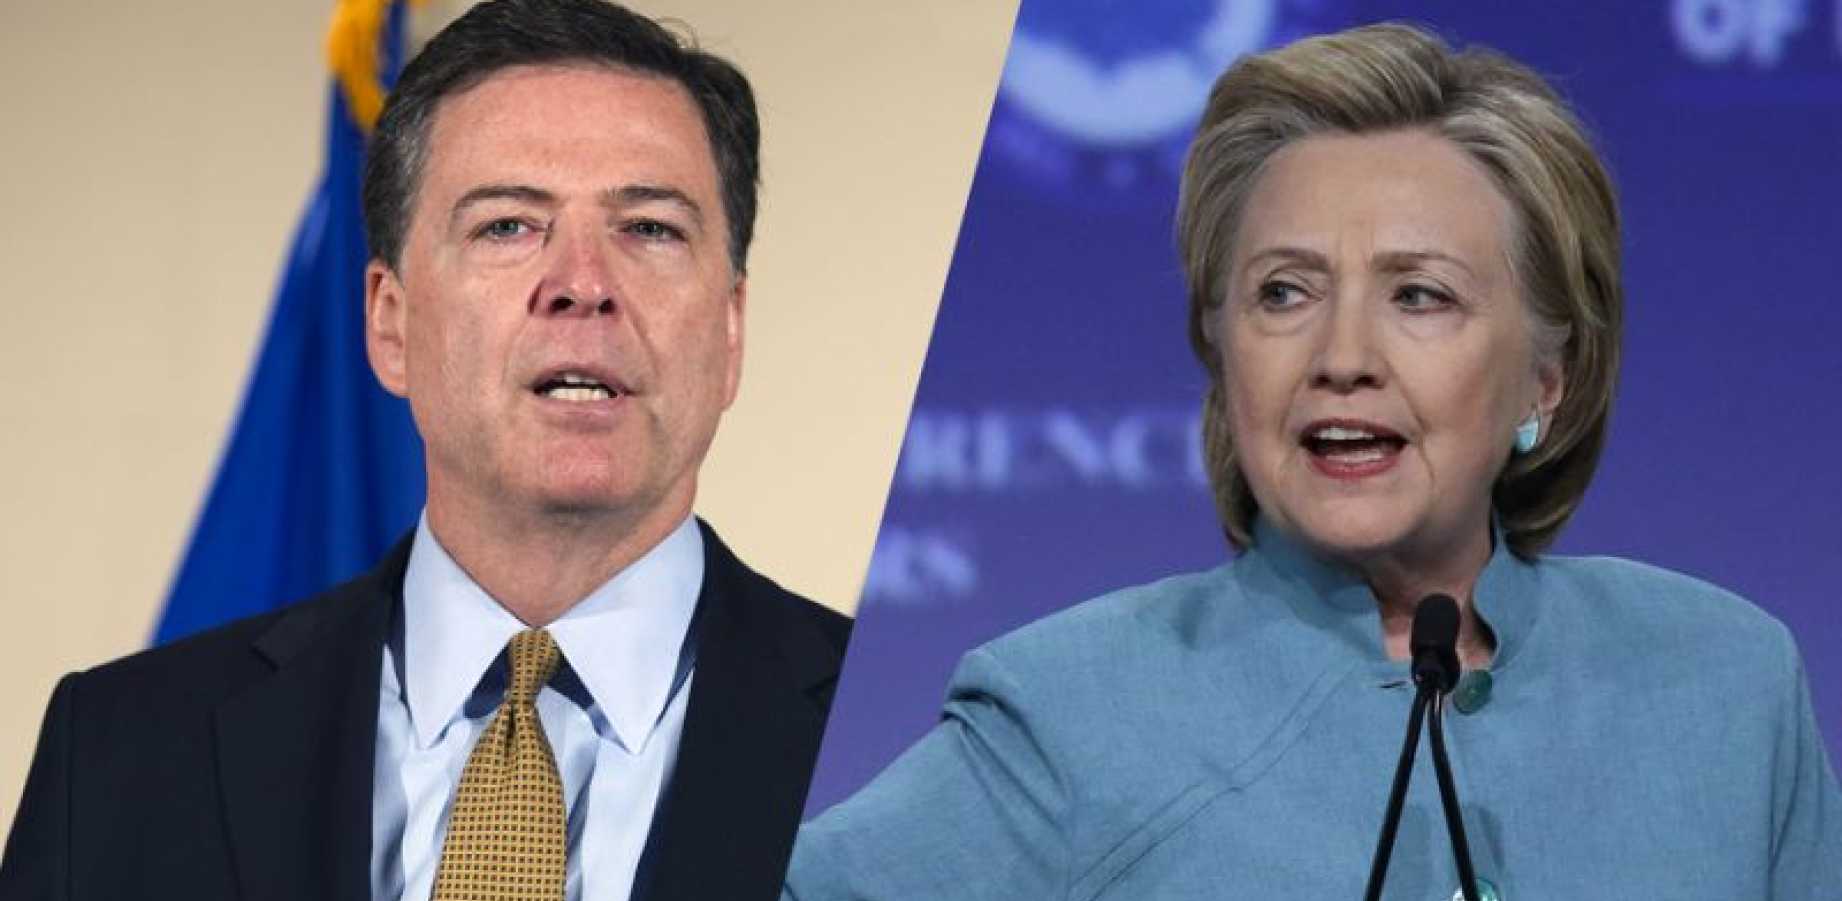 Fraud James Comey Tells Justice Dept. to Reject Trump’s Wiretapping Claim